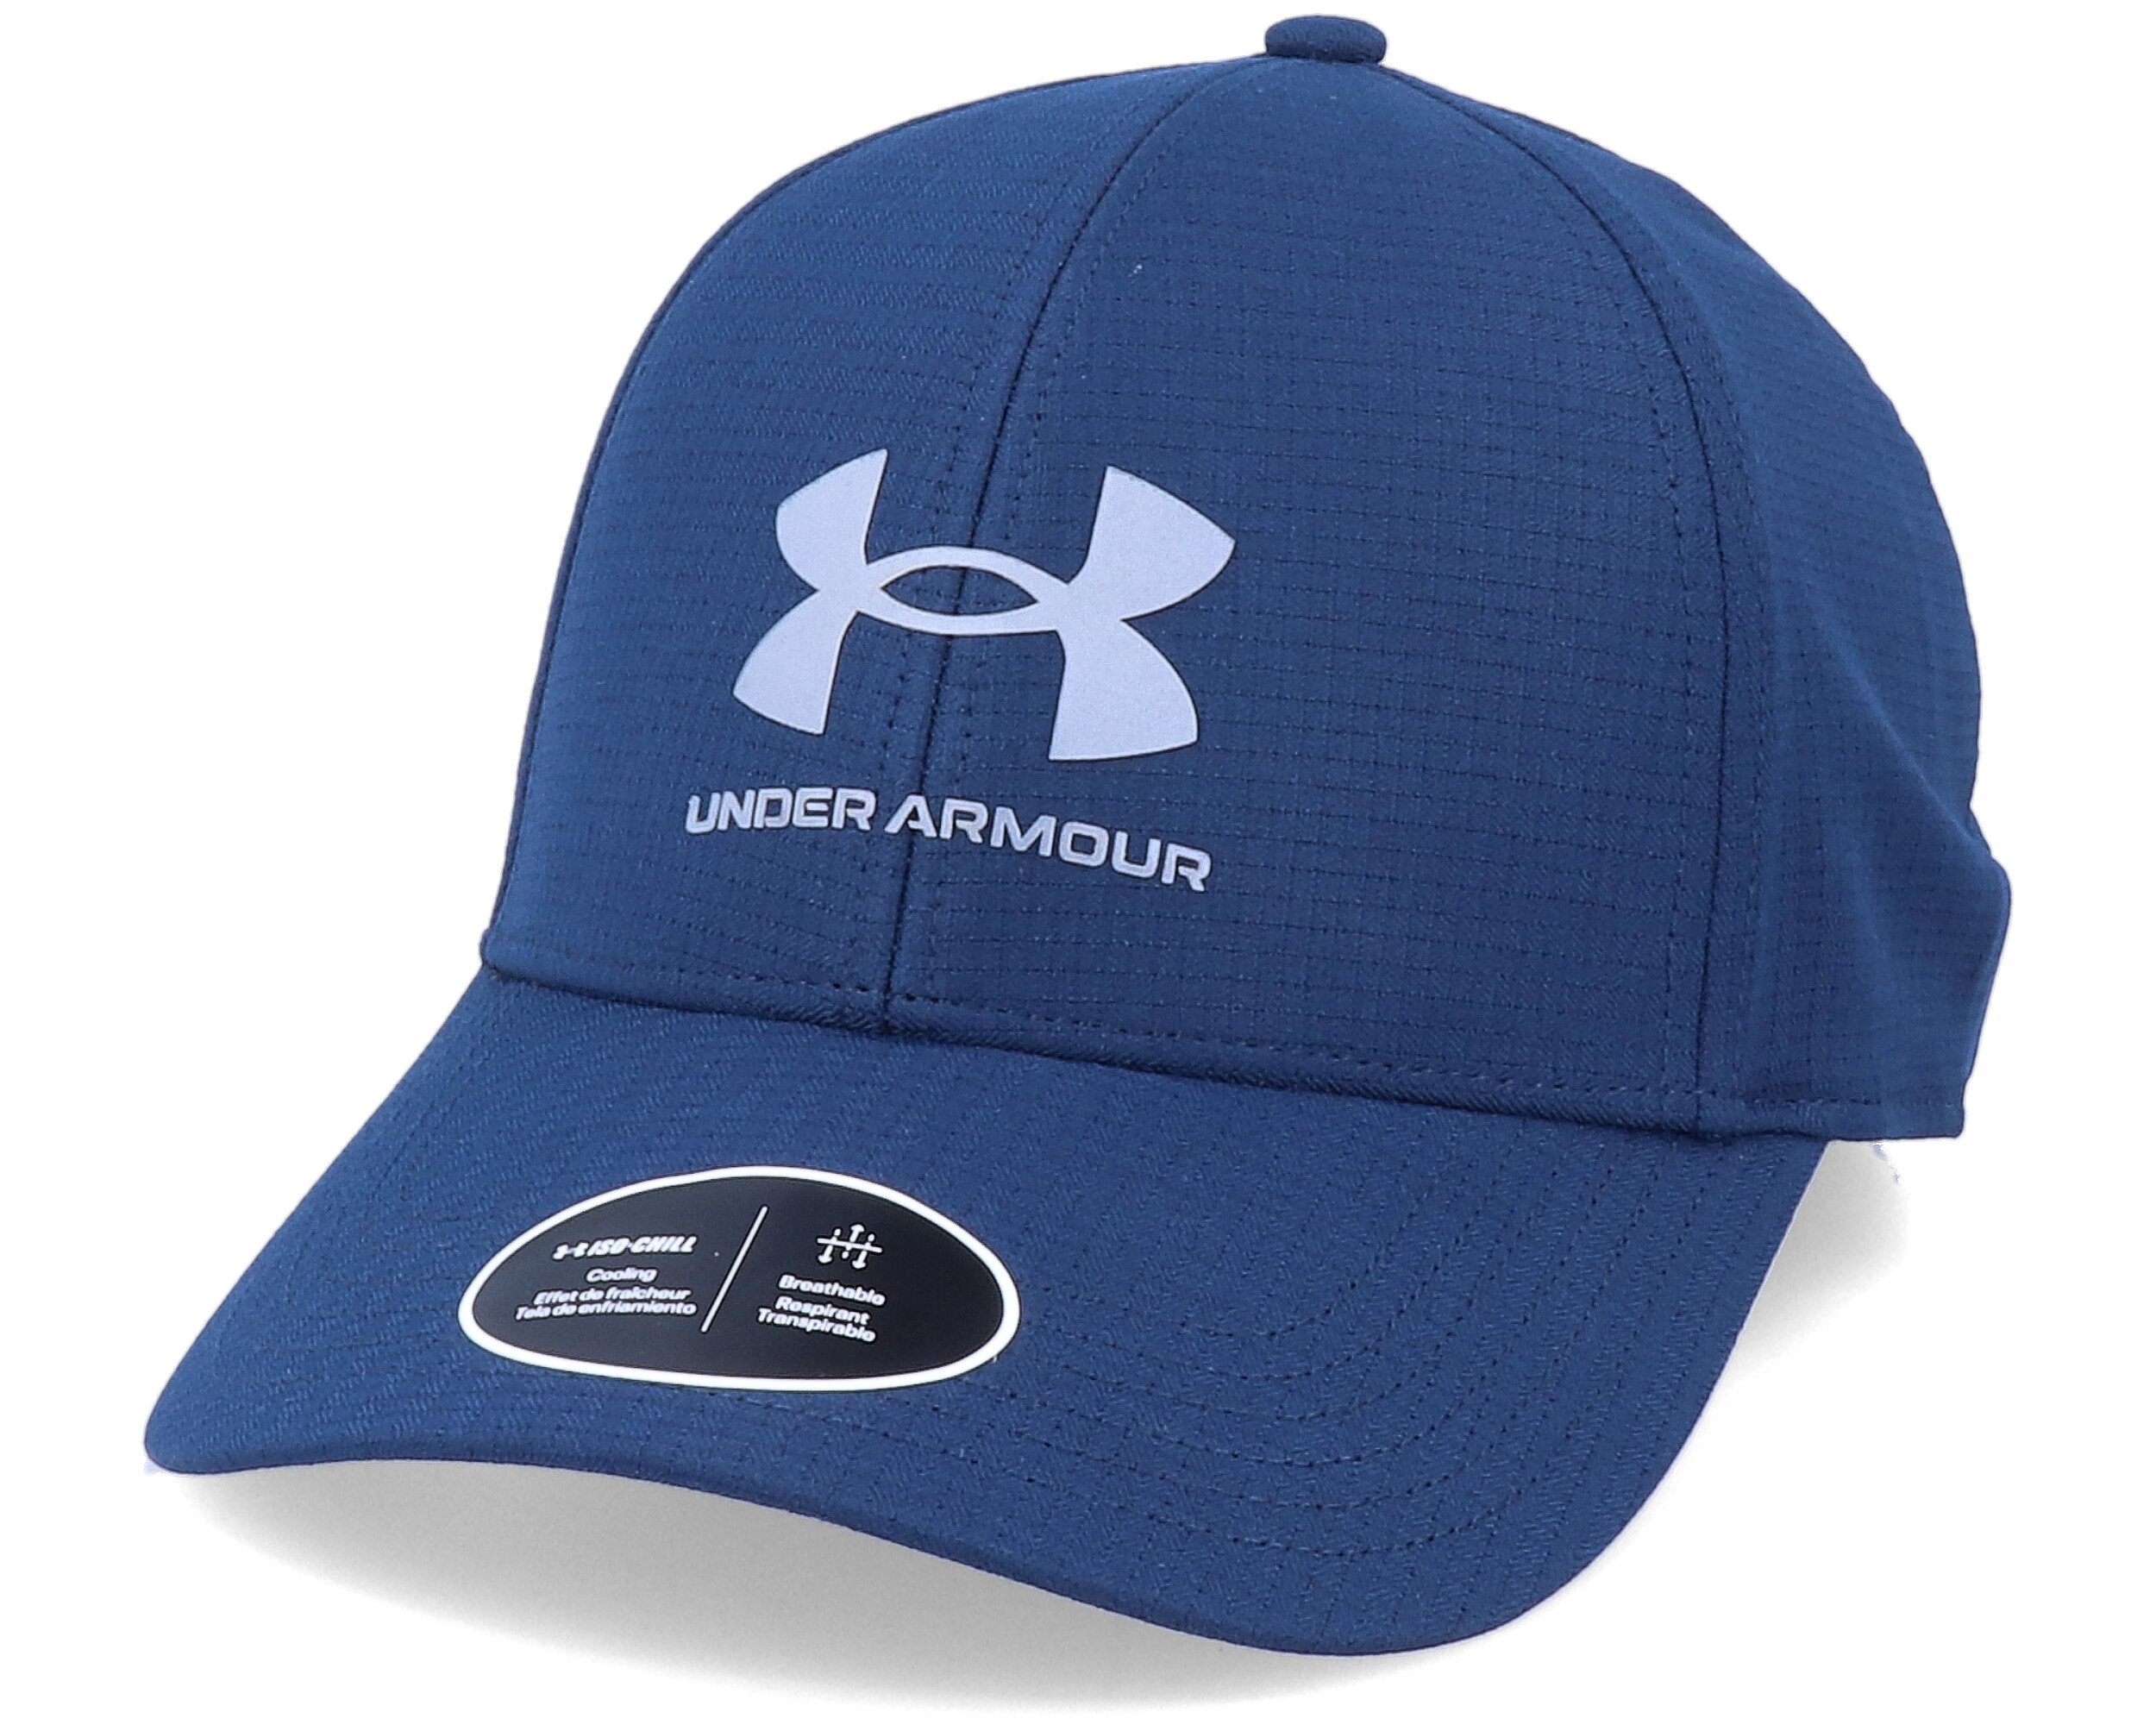 Under Armour Iso-chill Armourvent Fitted Baseball Cap, Academy